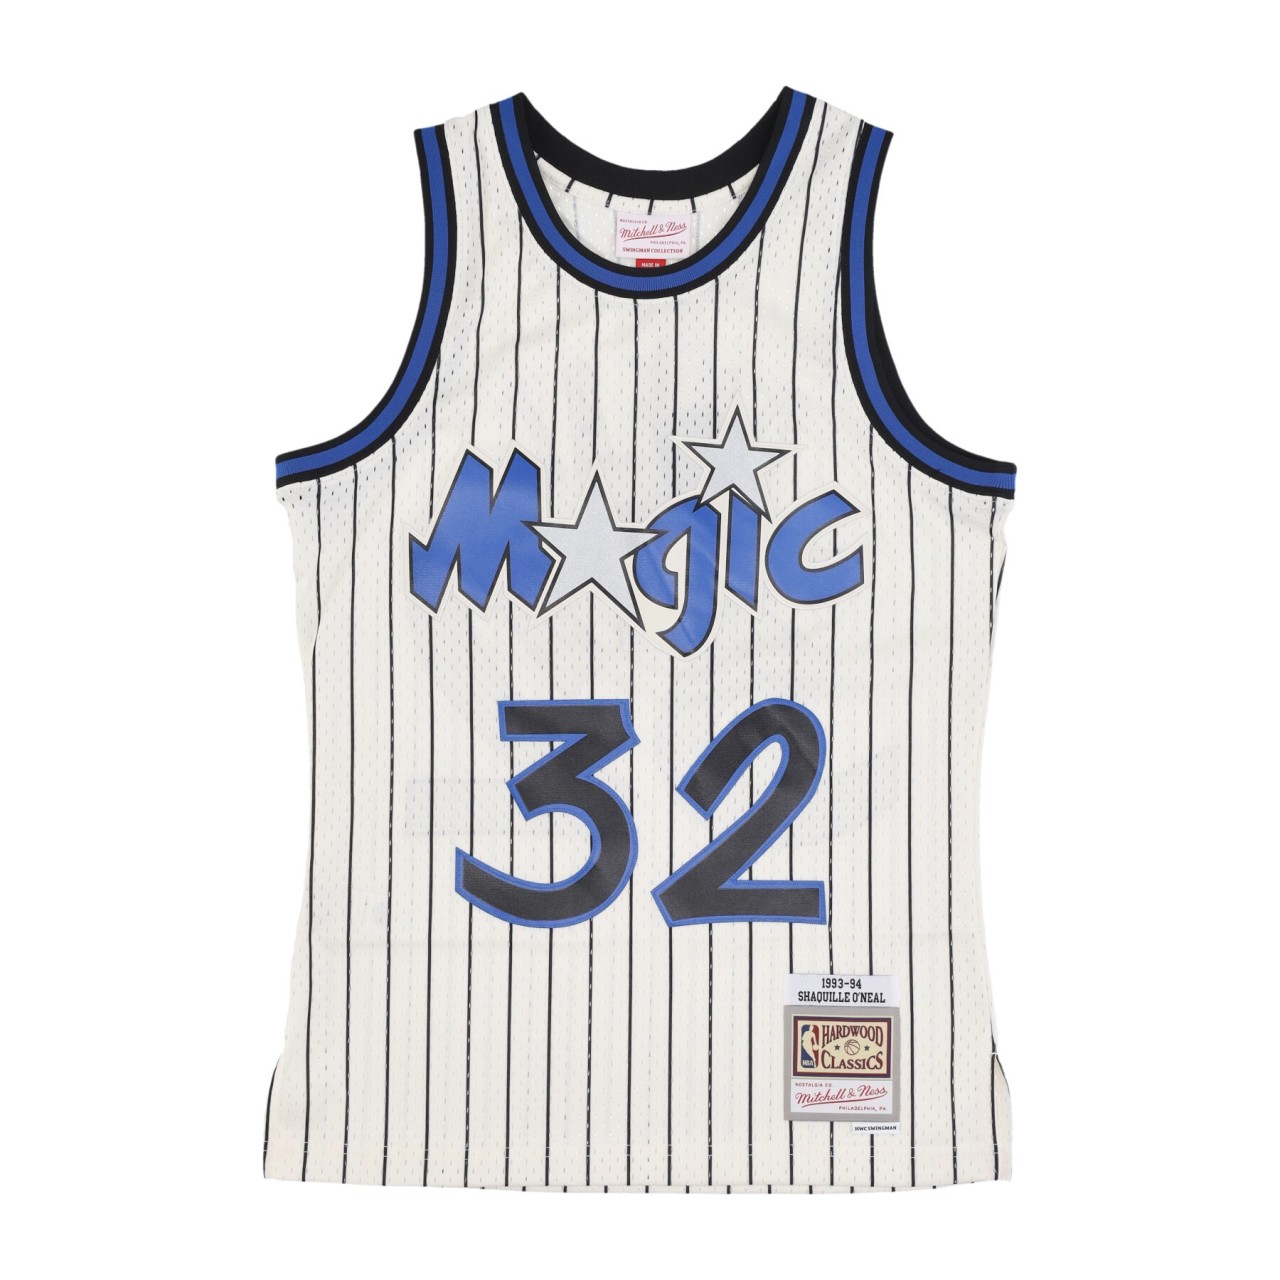 MITCHELL & NESS NBA OFF WHITE TEAM COLOR SWINGMAN JERSEY hardwood classics 1993 NO 32 SHAQUILLE O&#039;NEAL ORLMAG TFSM5052-OMA93SONOFWH